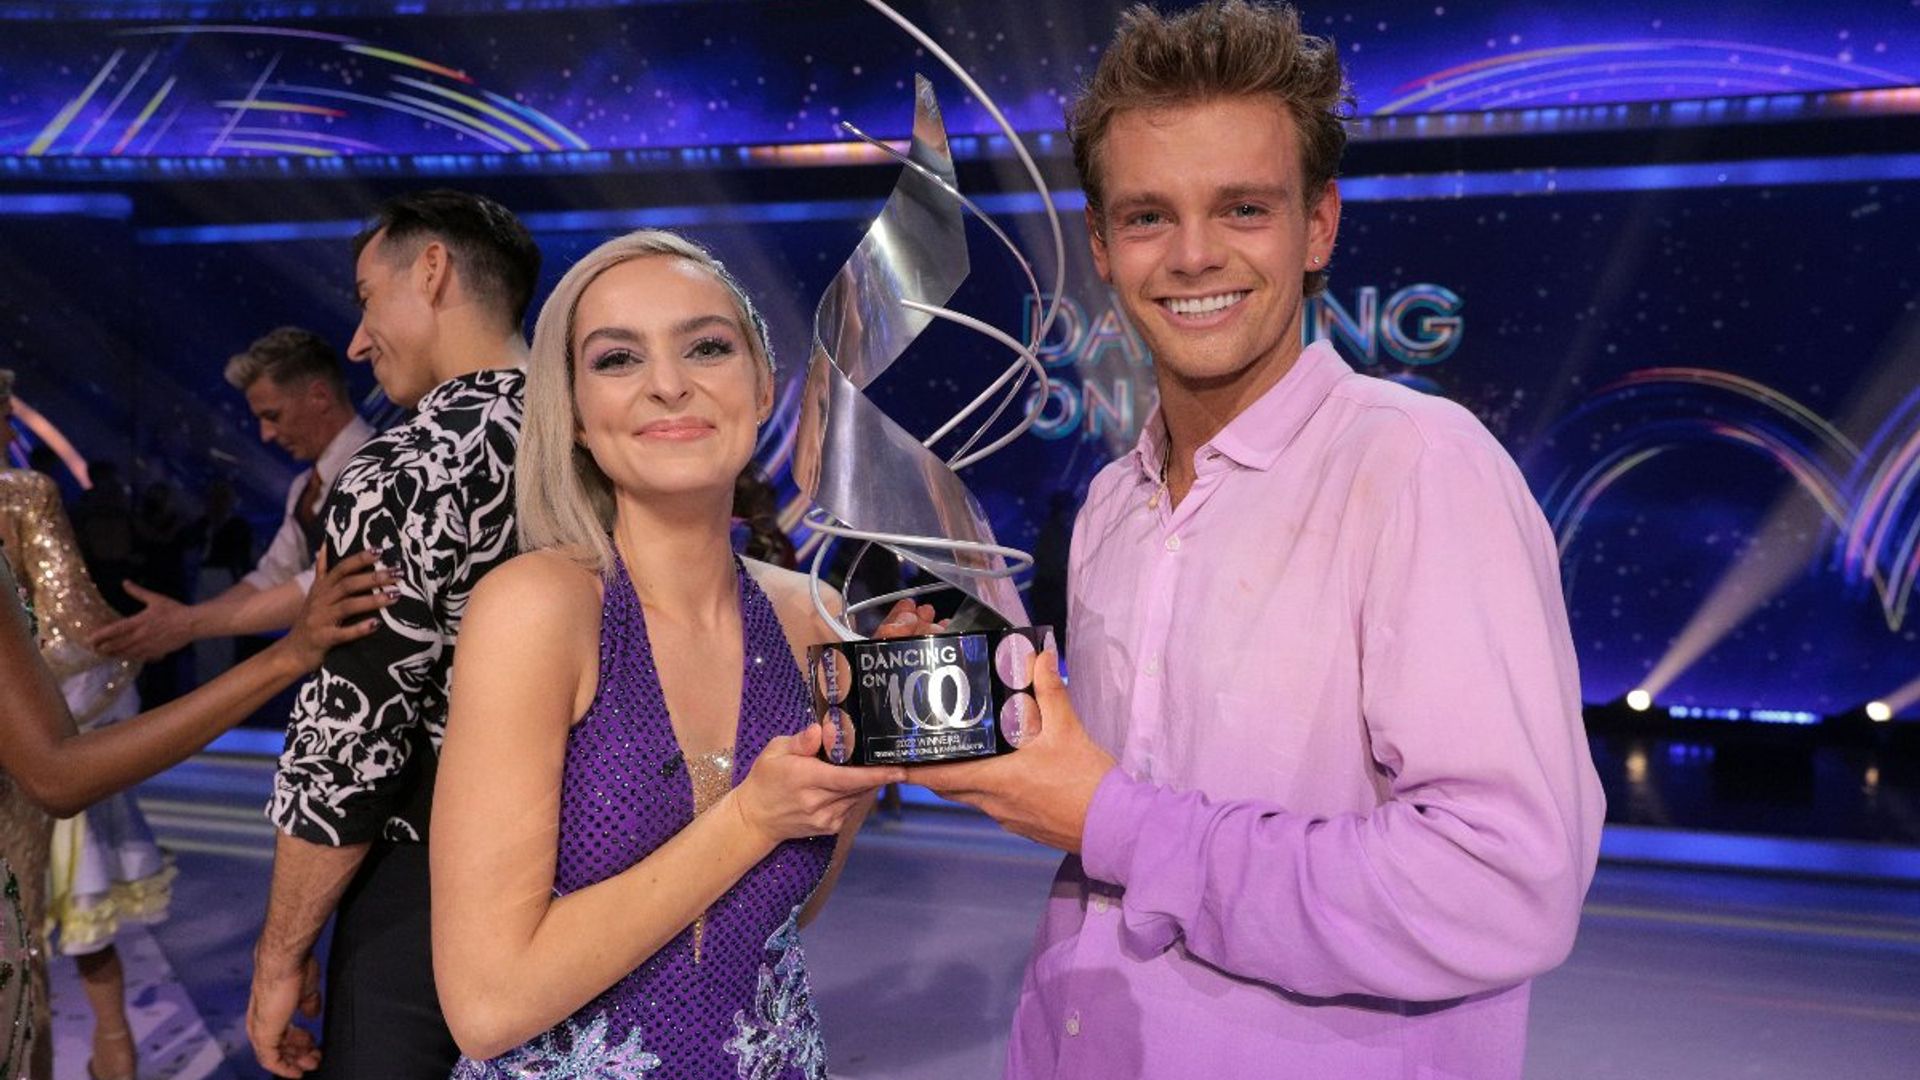 Dancing on Ice: Regan Gascoigne wins and fans all say the same thing